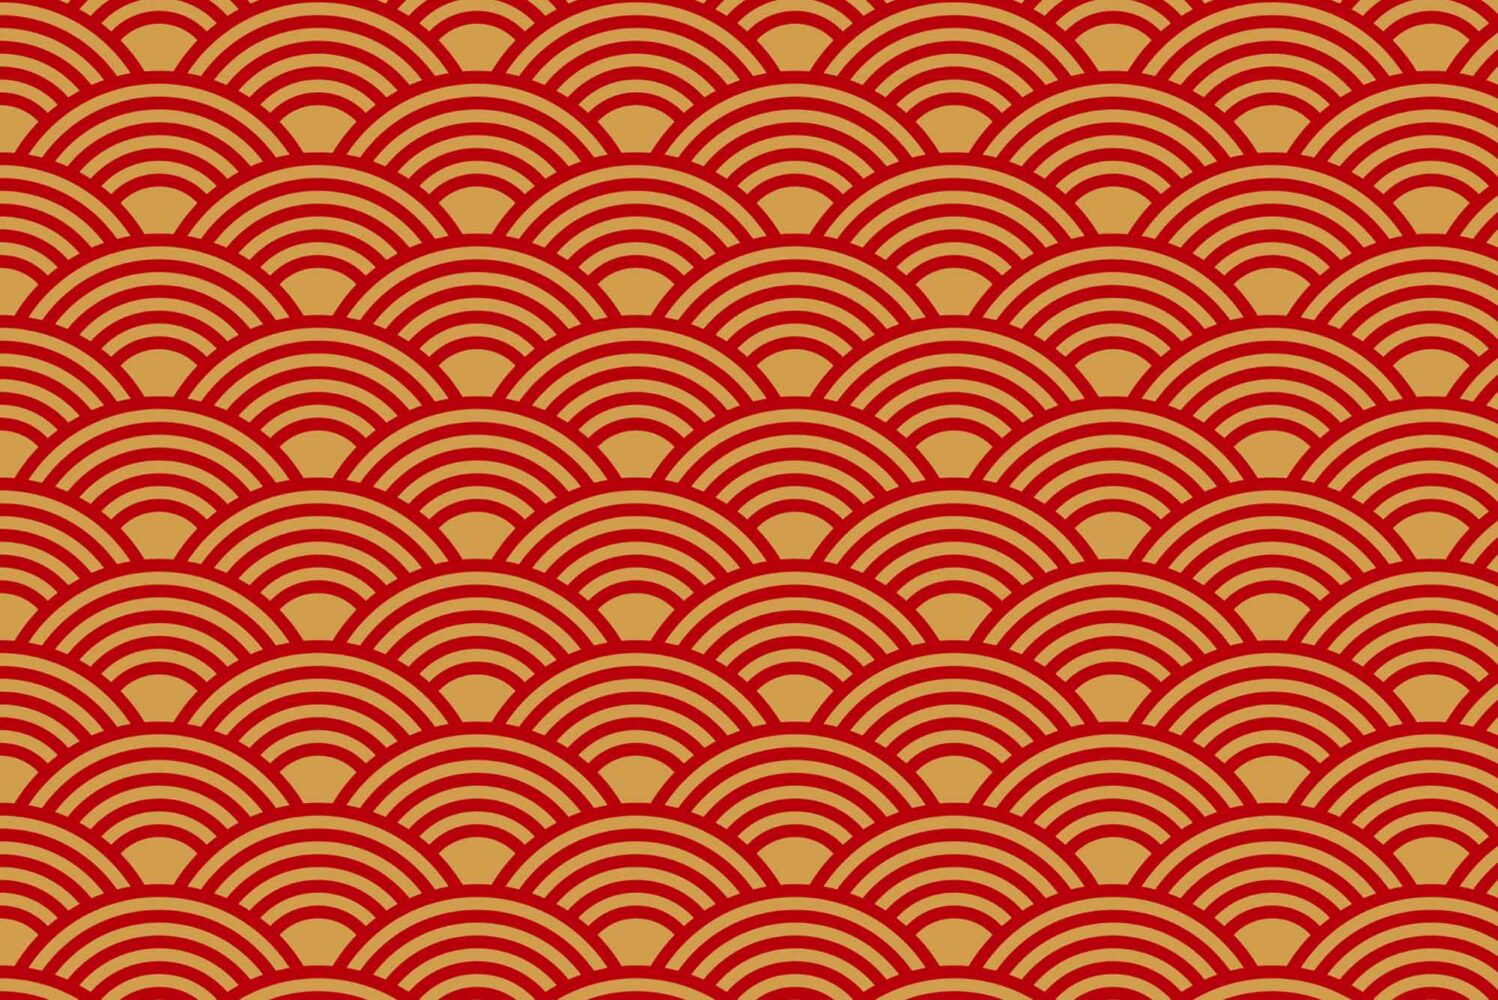 Photo: Red and gold vector image of half spirals.